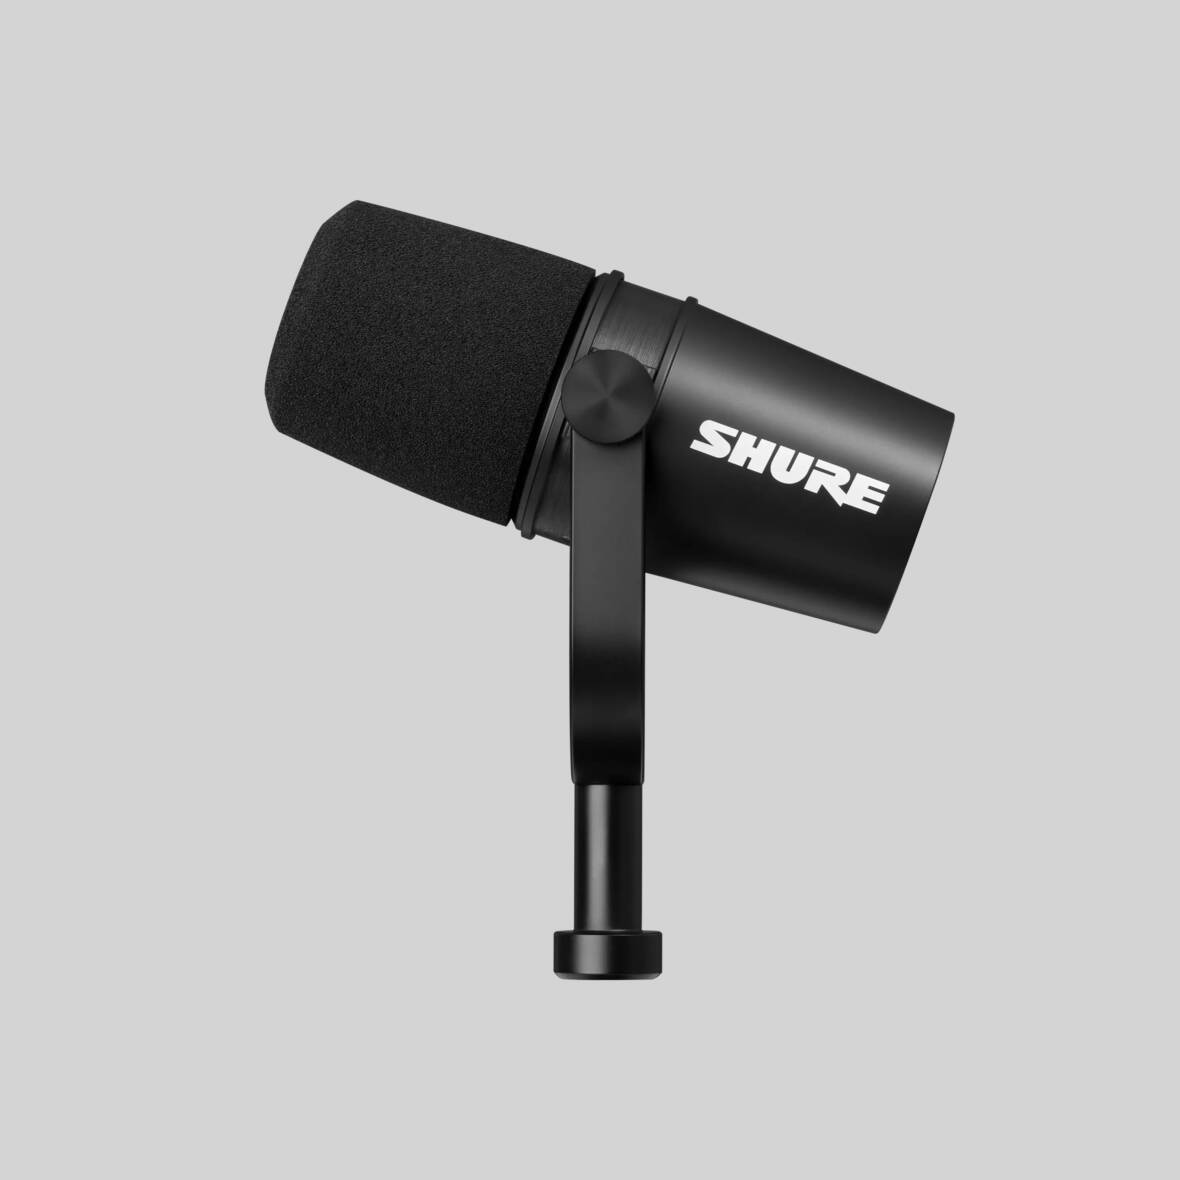 MV7X - XLR Podcast Microphone - Shure Middle East and Africa